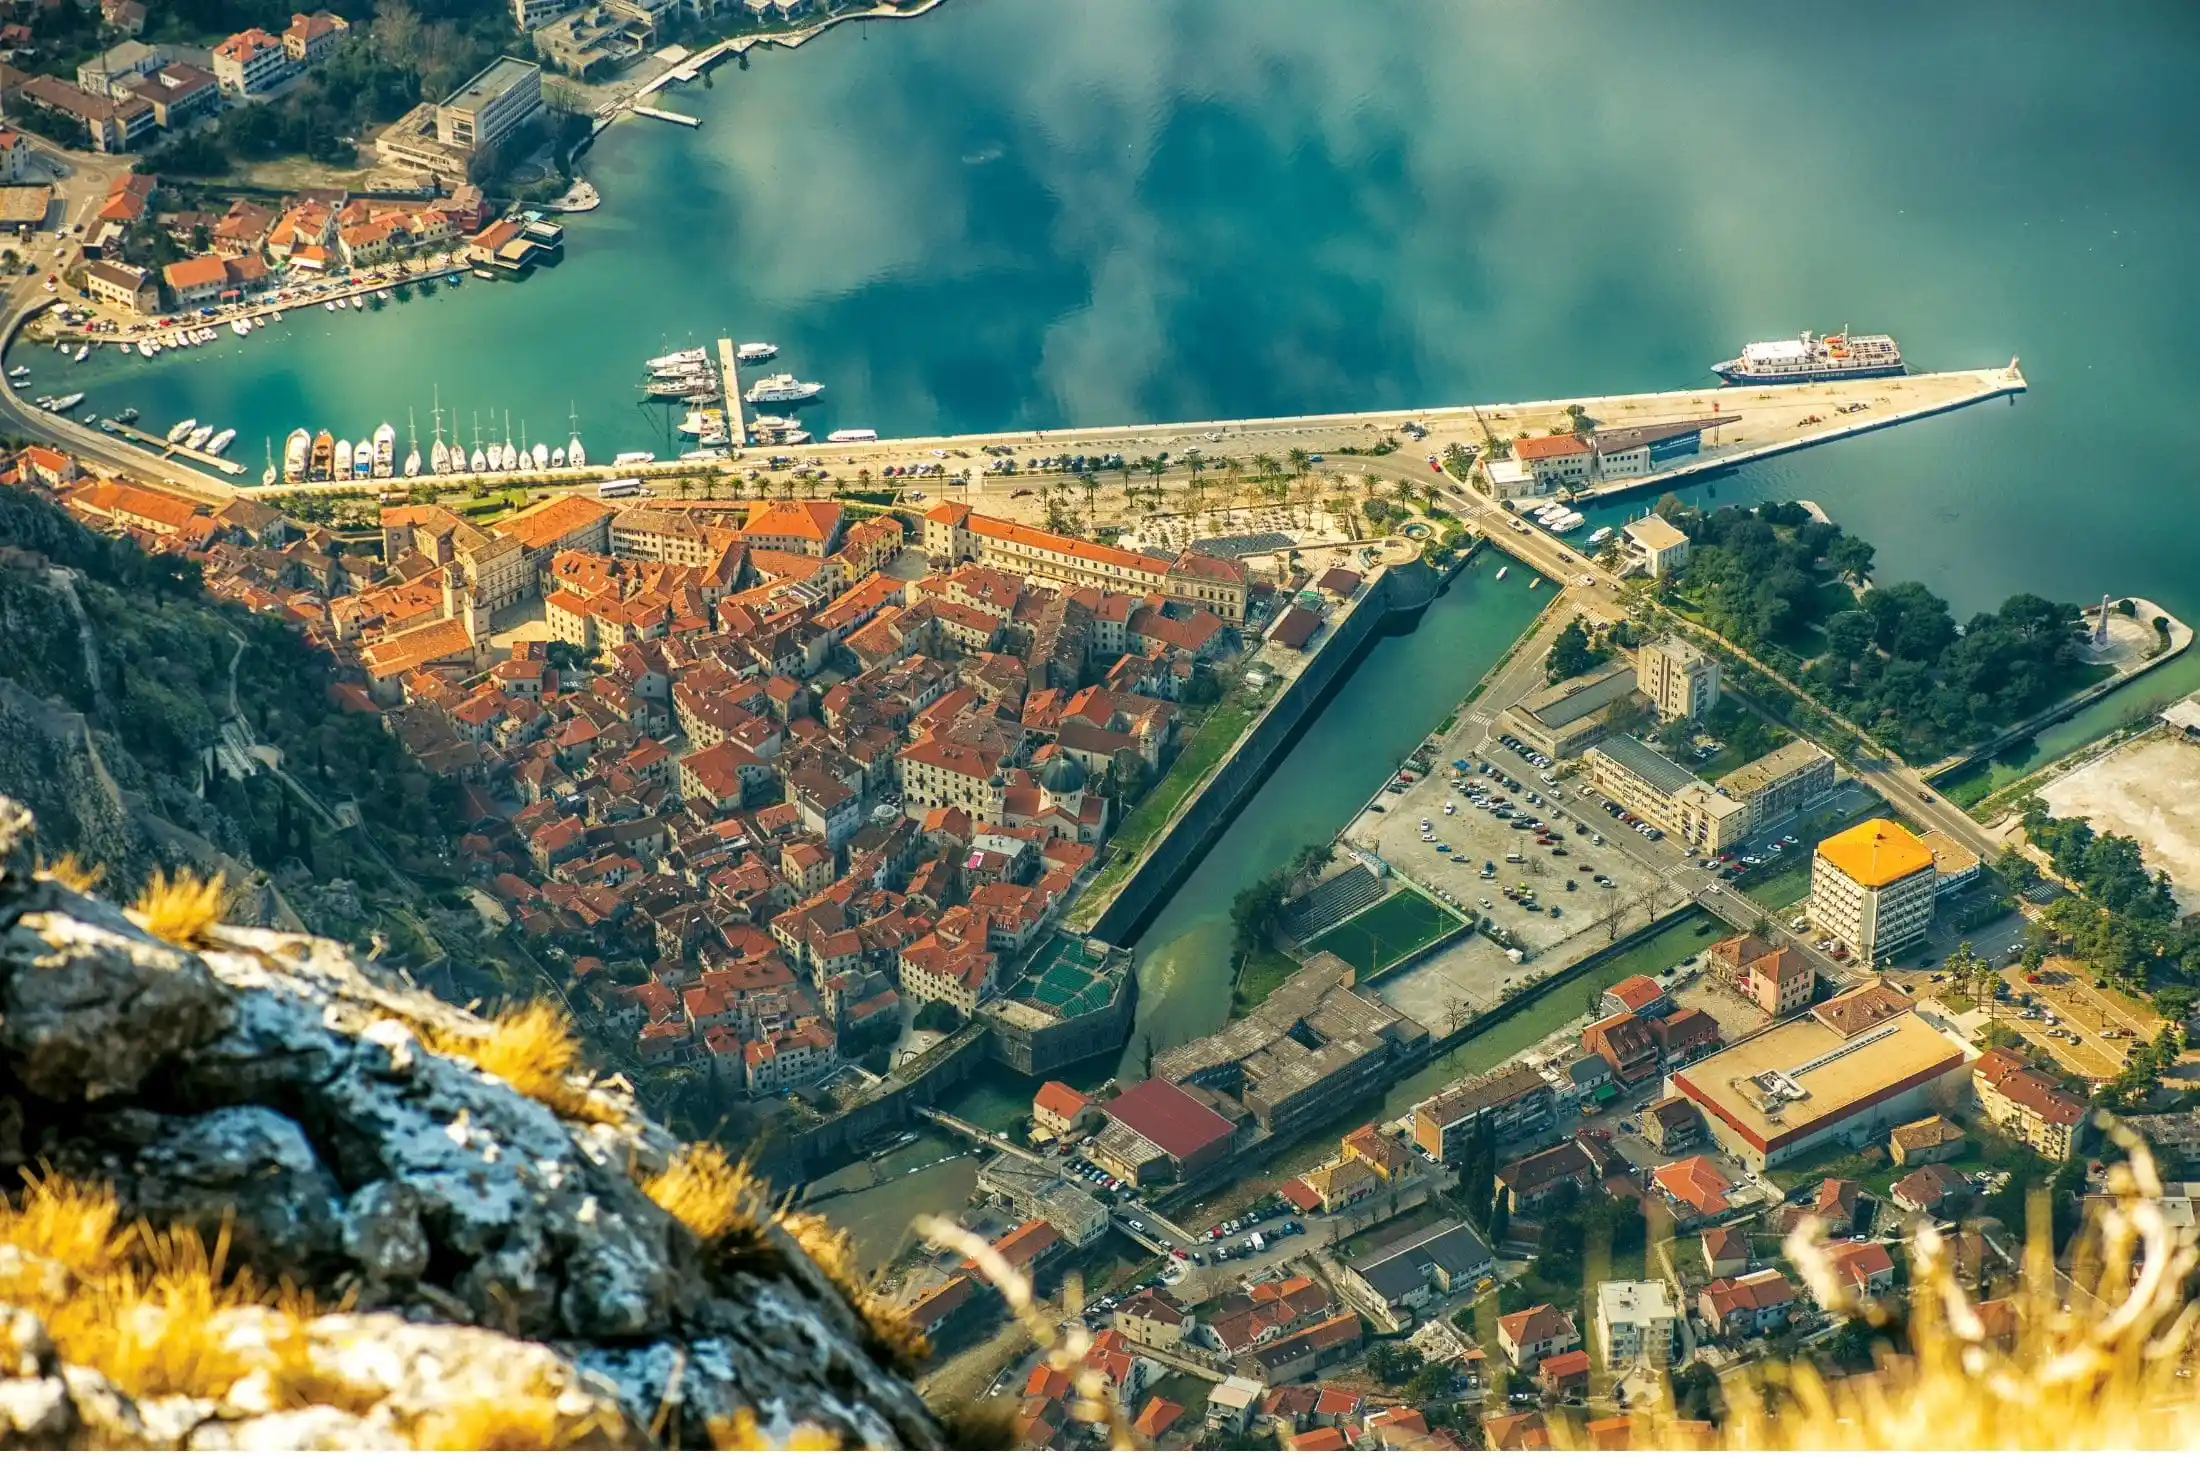 Overhead view of Kotor - the Old Town and the port